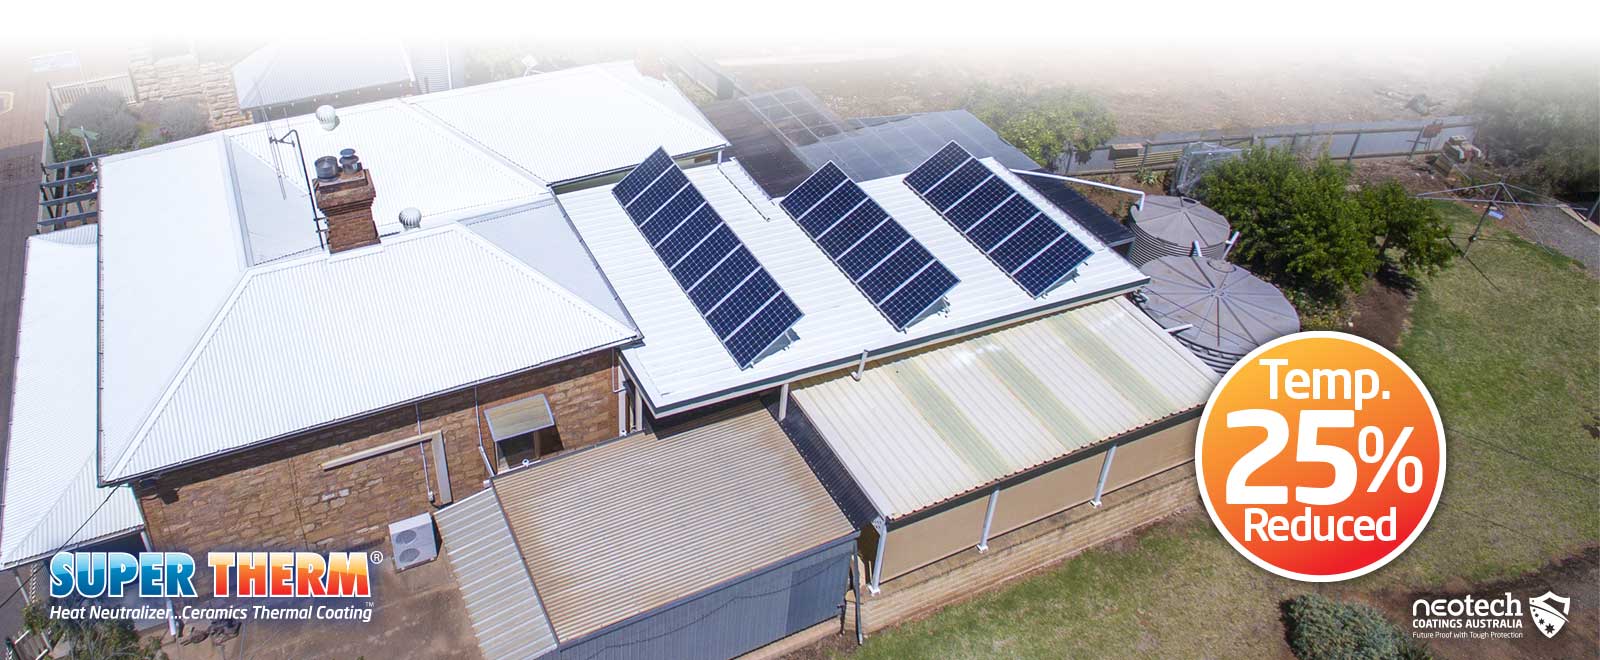 Booleroo Centre South Australia Cool Roof Energy Savings Ceramic Coating NEOtech Coatings - Super Therm